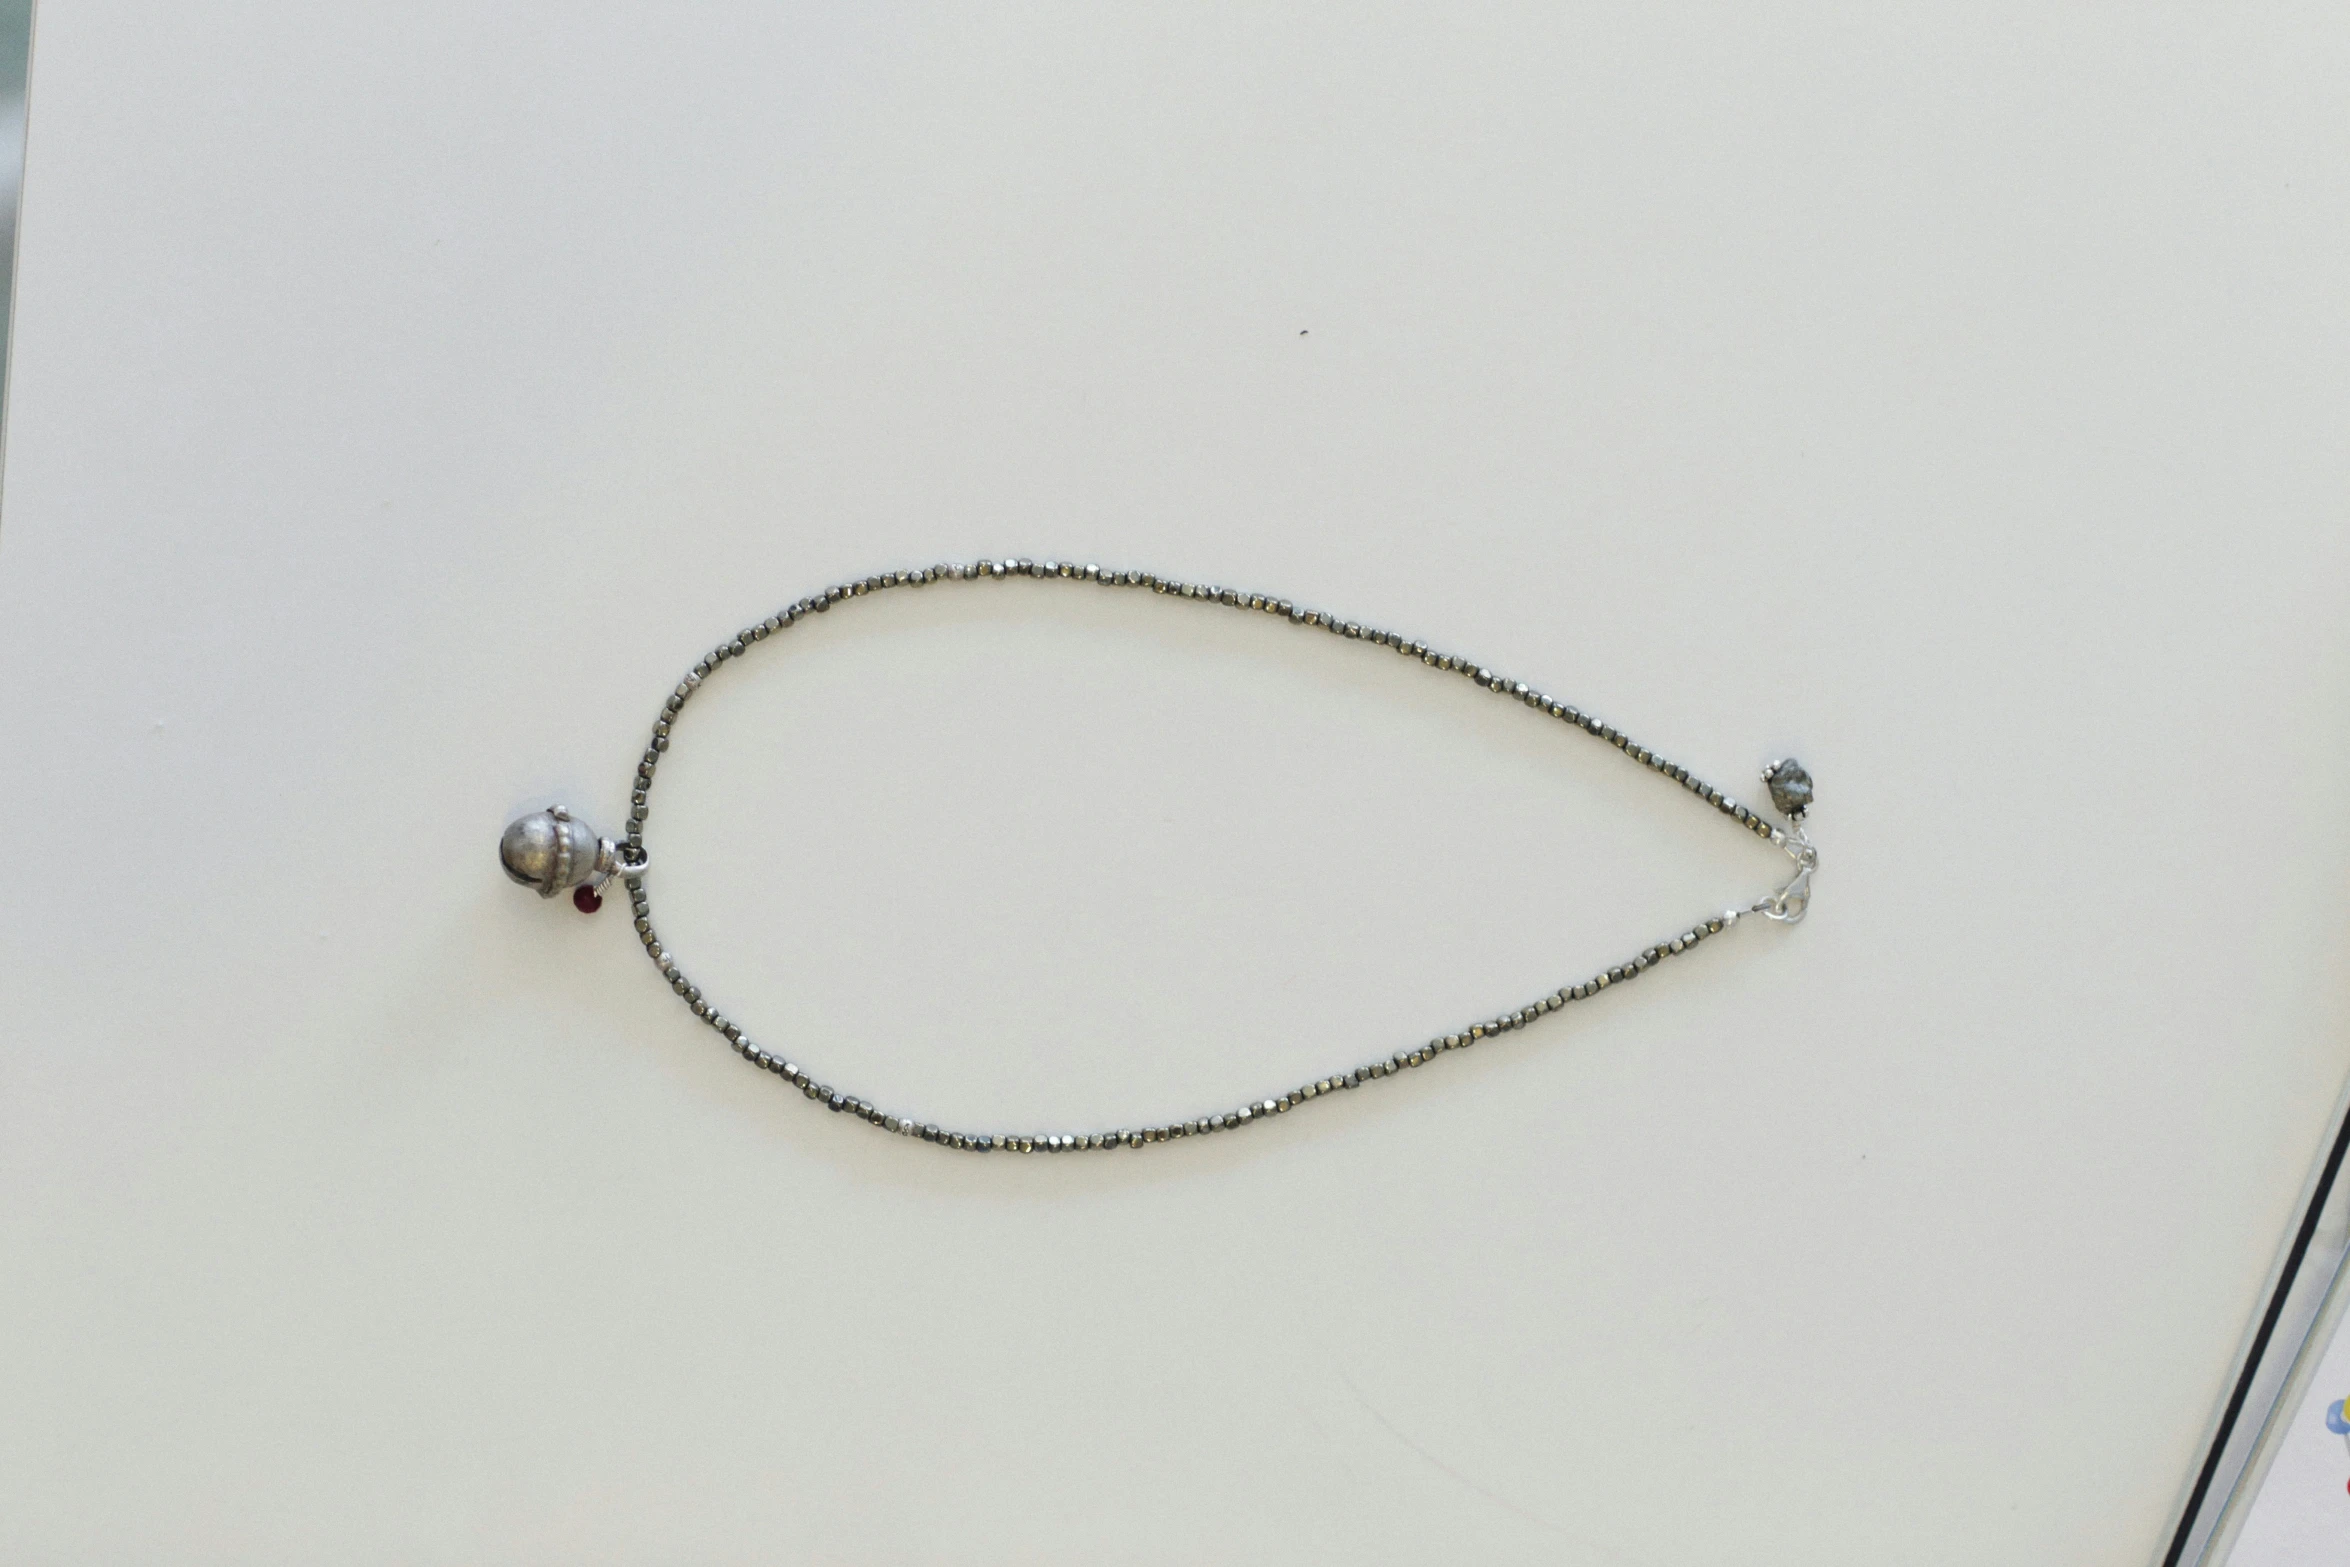 a silver necklace with beads on the bottom